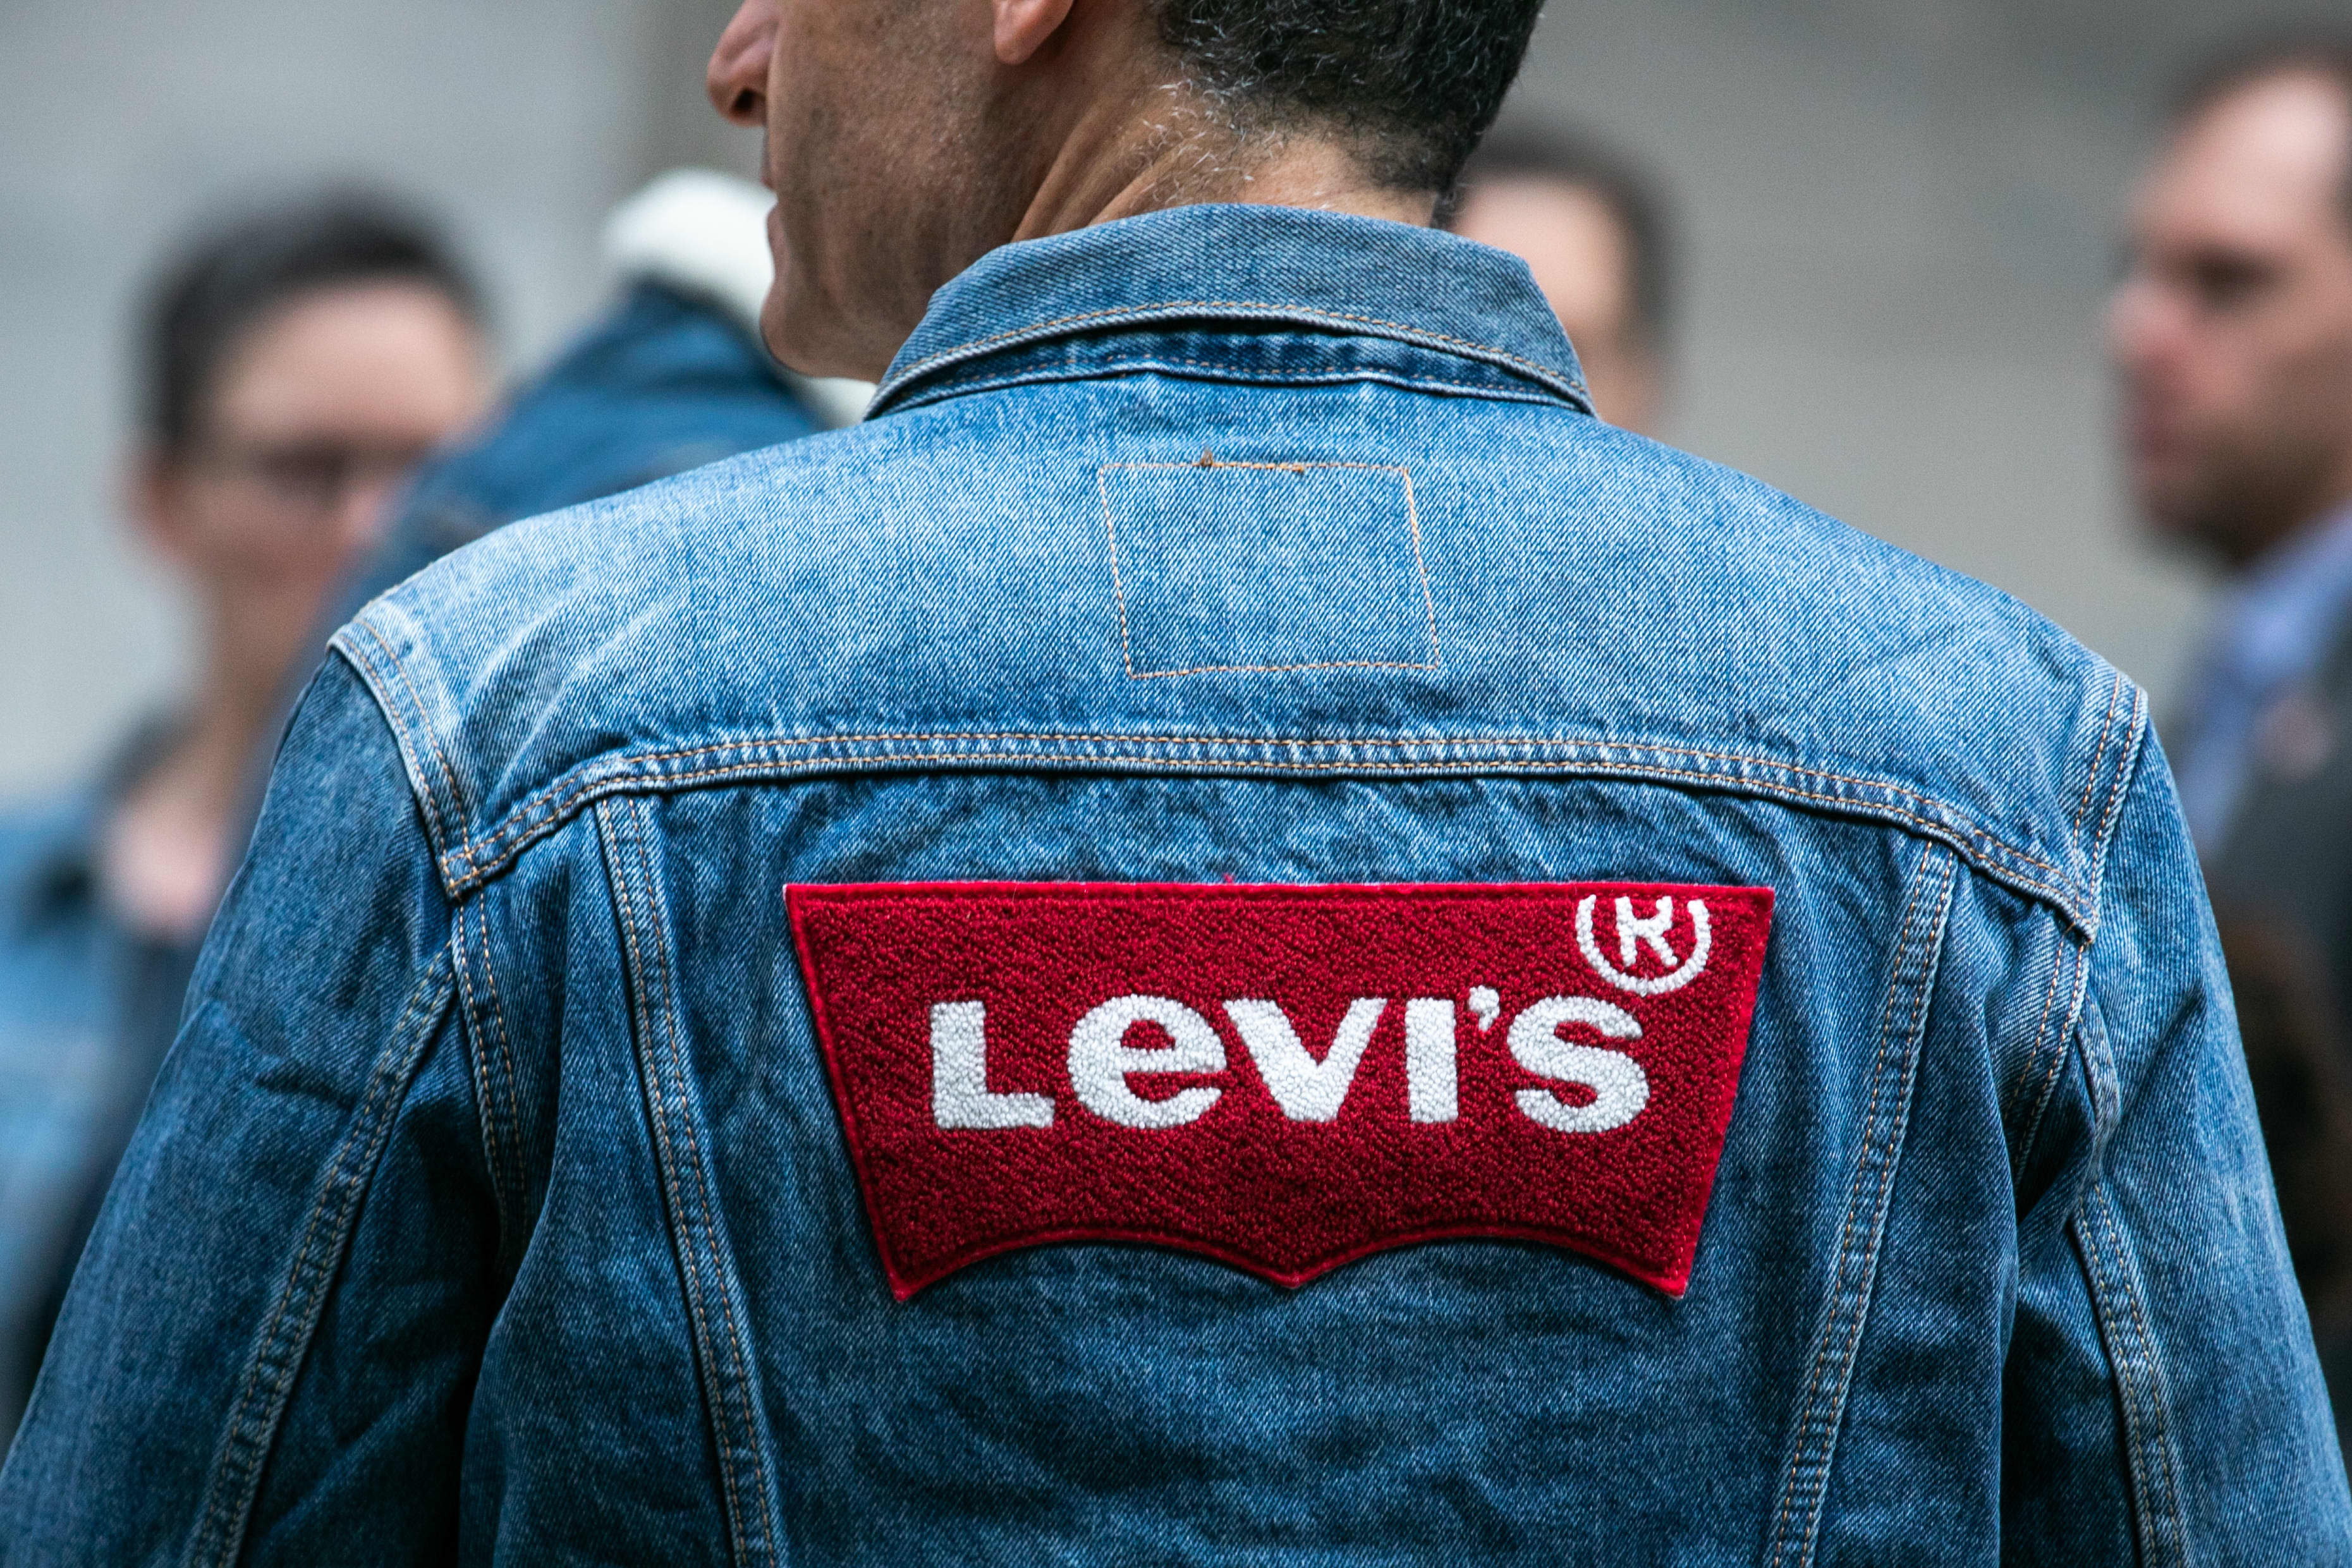 Levi Strauss CEO Chip Bergh on taking 